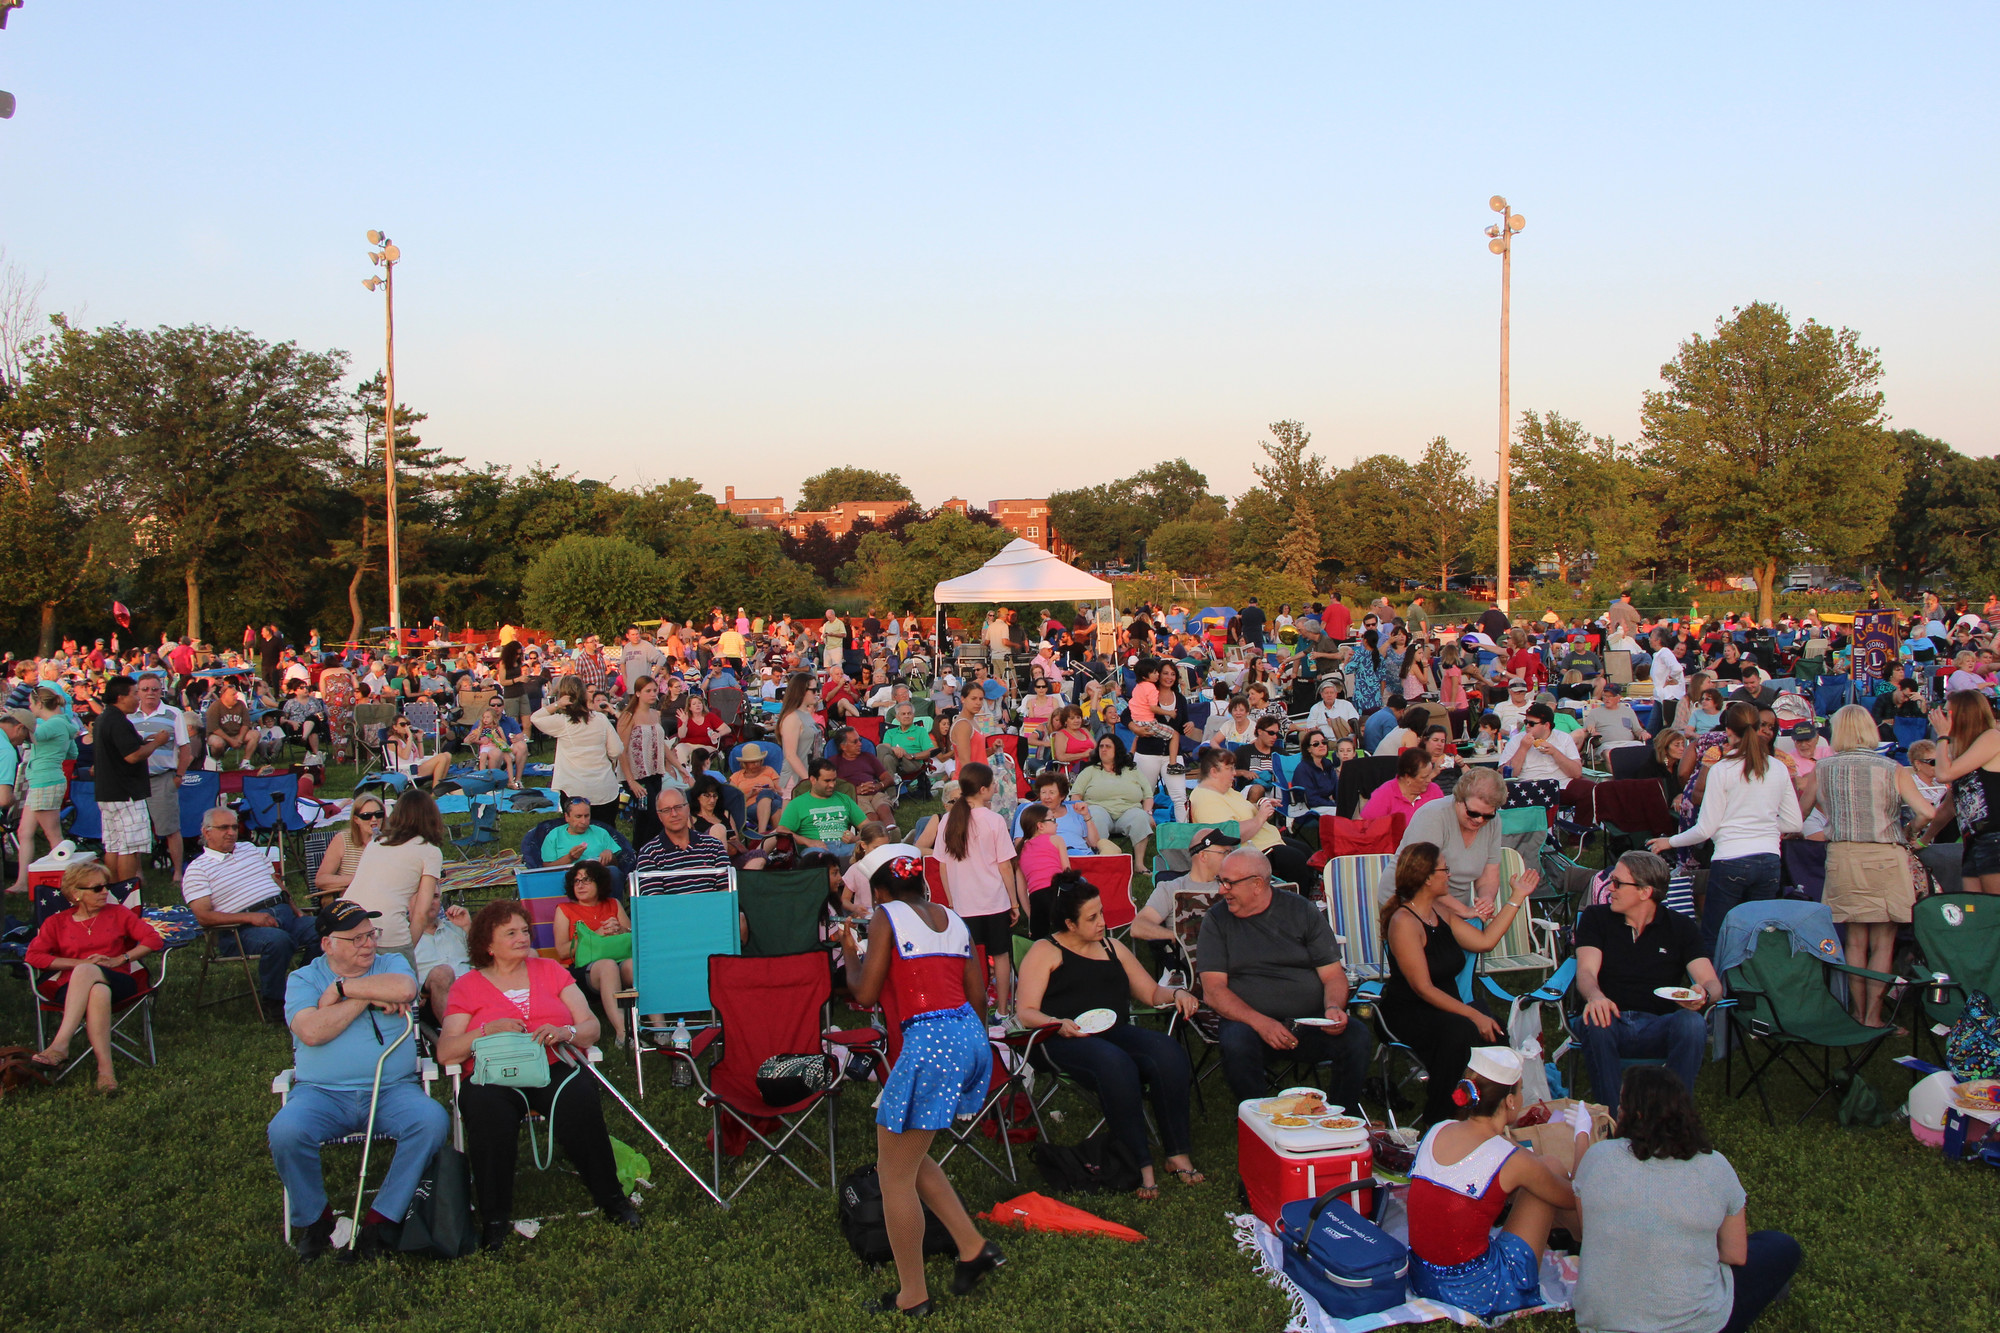 Thousands came to Centennial Park last Saturday to watch the village's annual fireworks show. People filled the park for the spectacle, which included a performance by the South Shore Symphony.